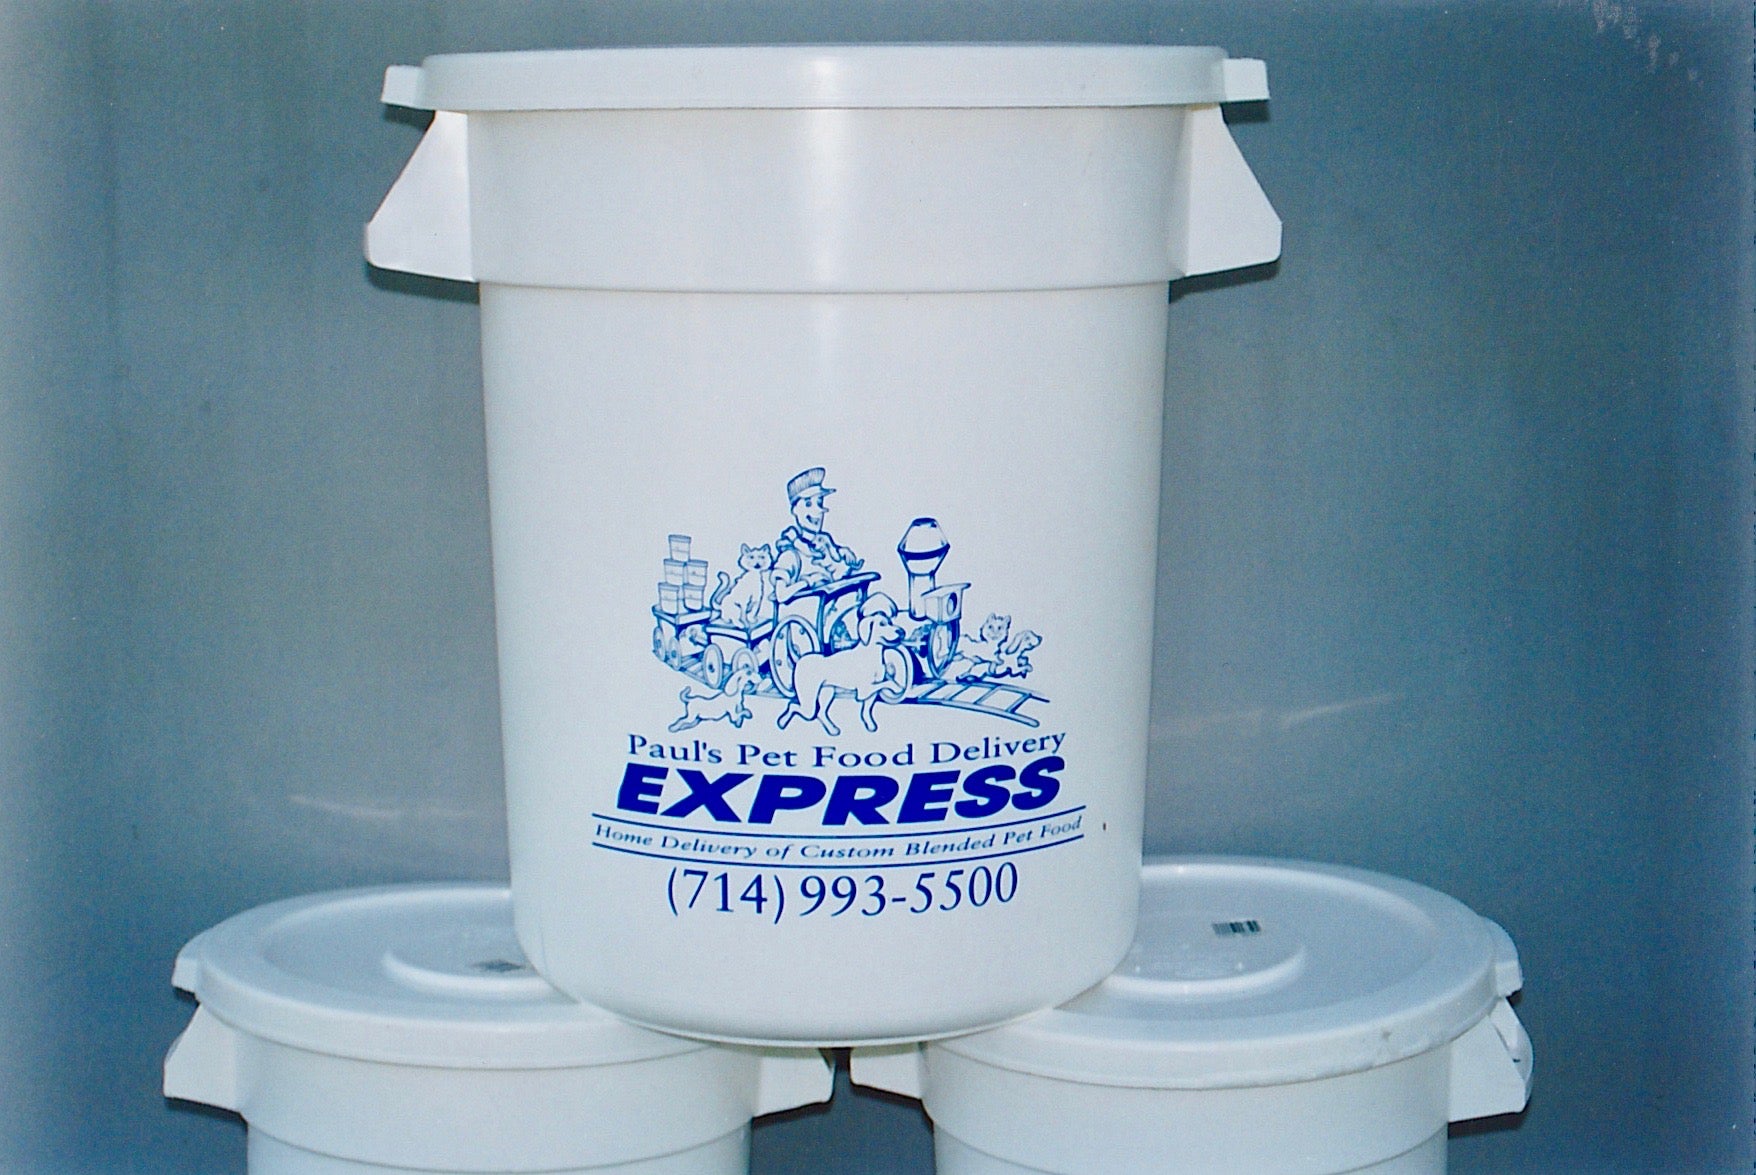 Pet Food Delivery Buckets